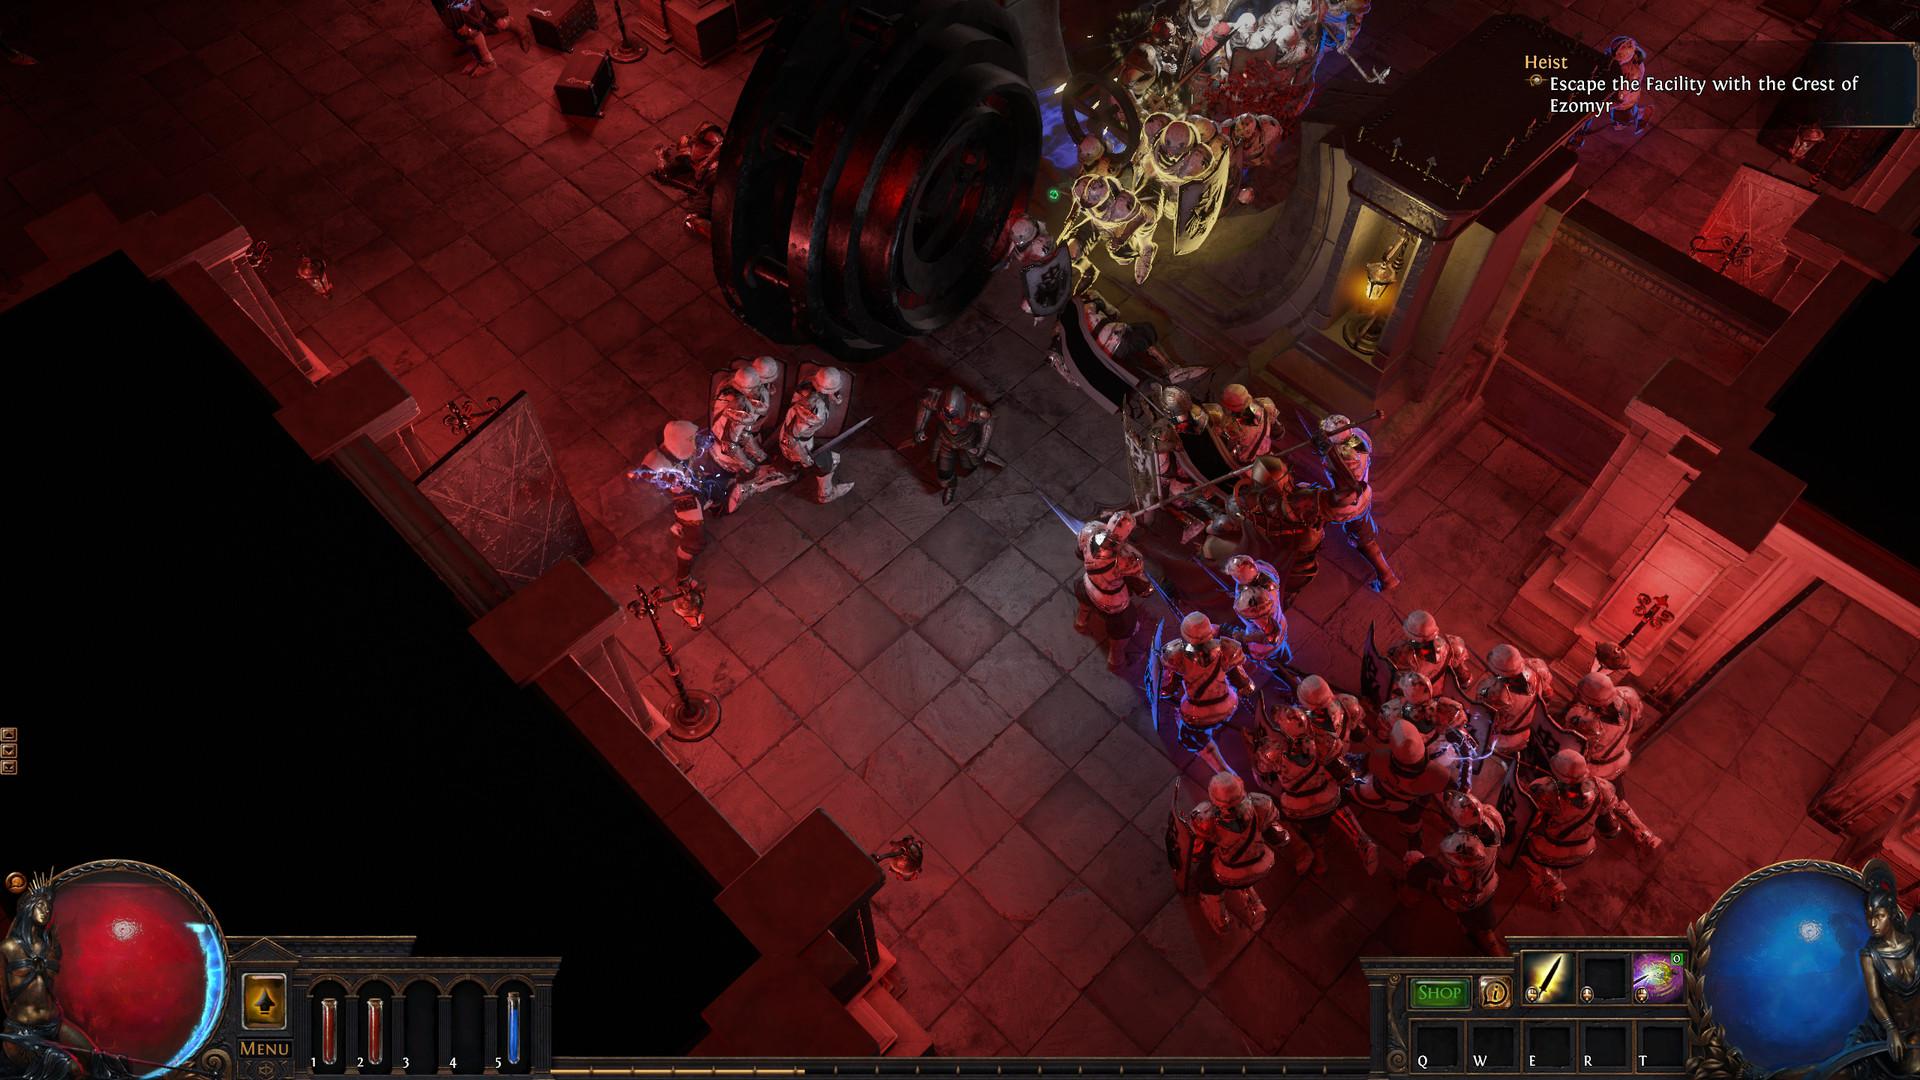 Screenshot №18 from game Path of Exile